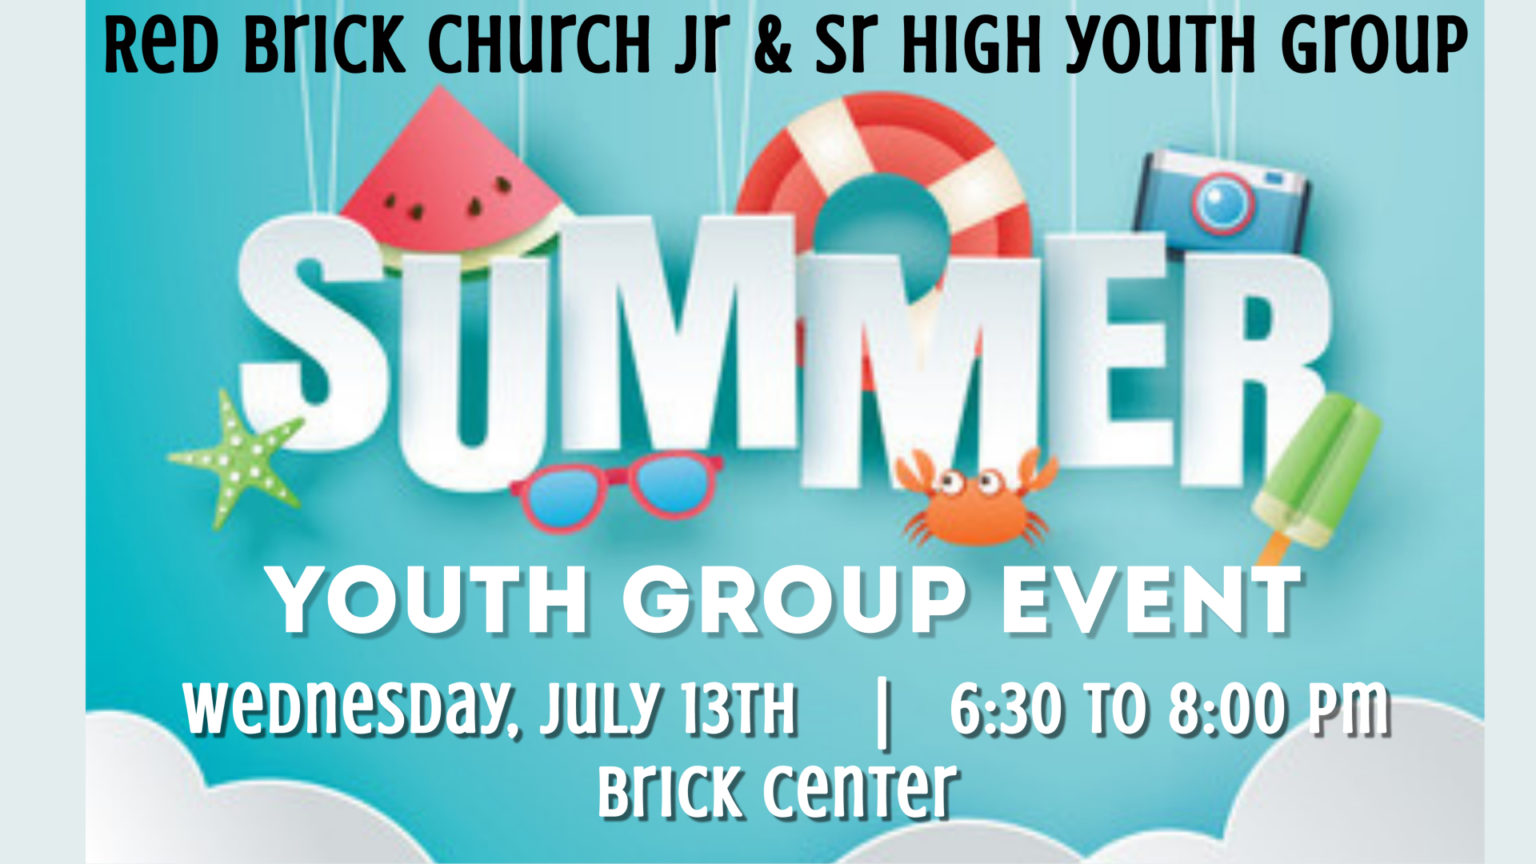 Youth Summer Event The Red Brick Church